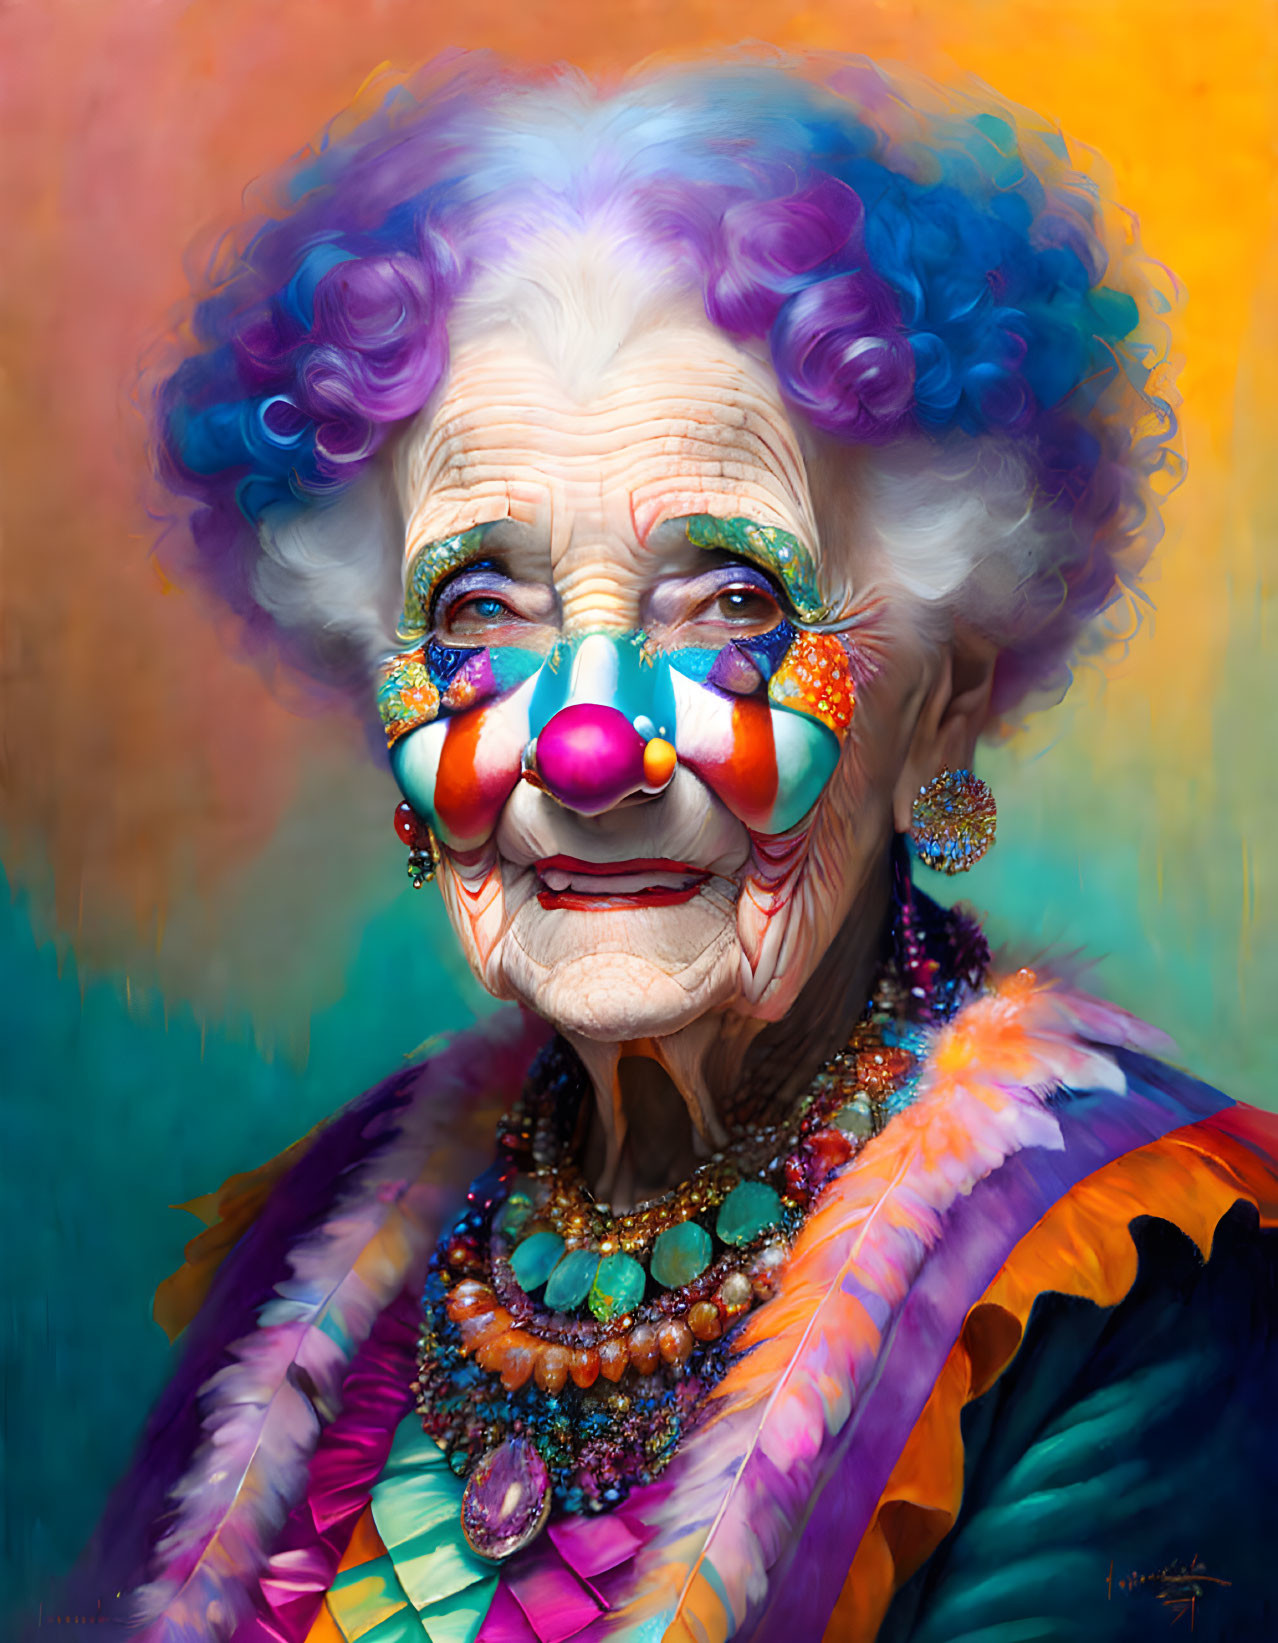 Lady Clown from yesteryear